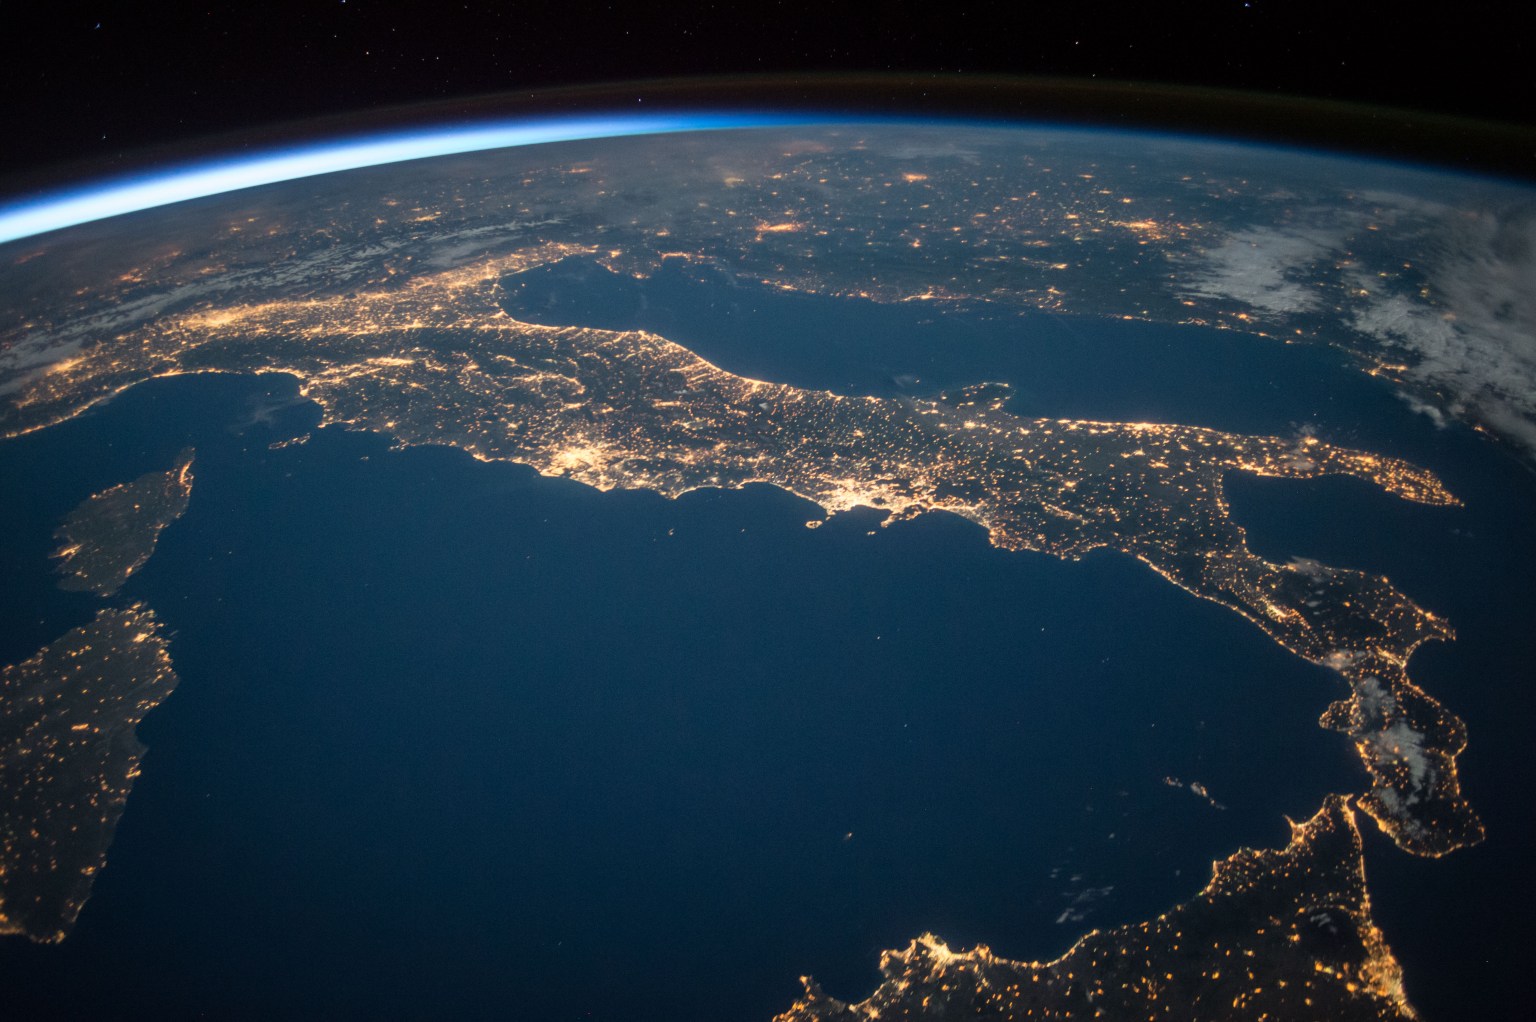 The familiar "boot" shape of the country of Italy stands out in this nighttime image with sparkling city lights reaching from Sicily off the "toe" of the boot, to the approaches to the Alps on the north end of the country.